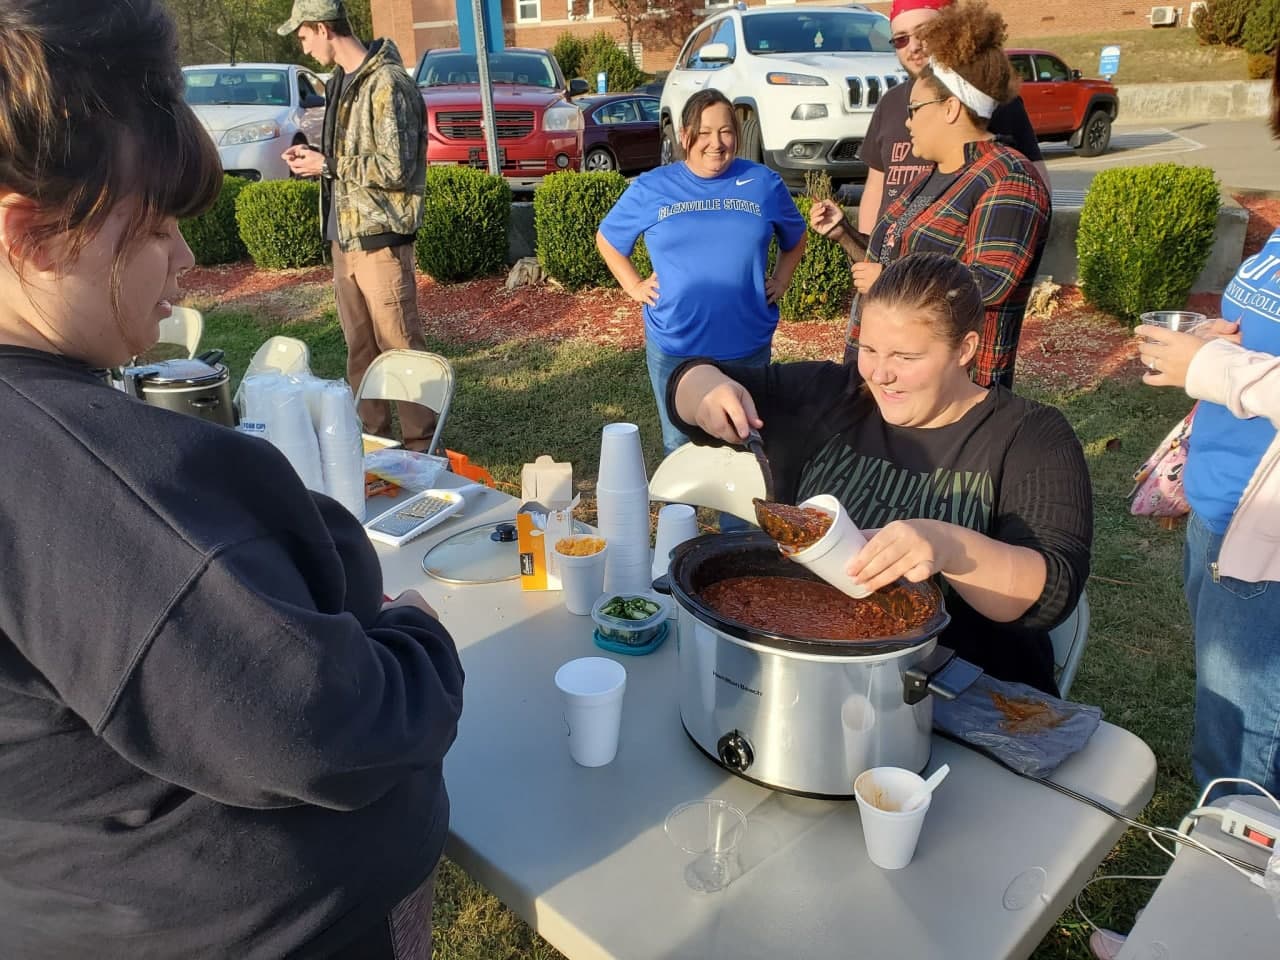 College students serving chili into styrofoam cups in the outdoors